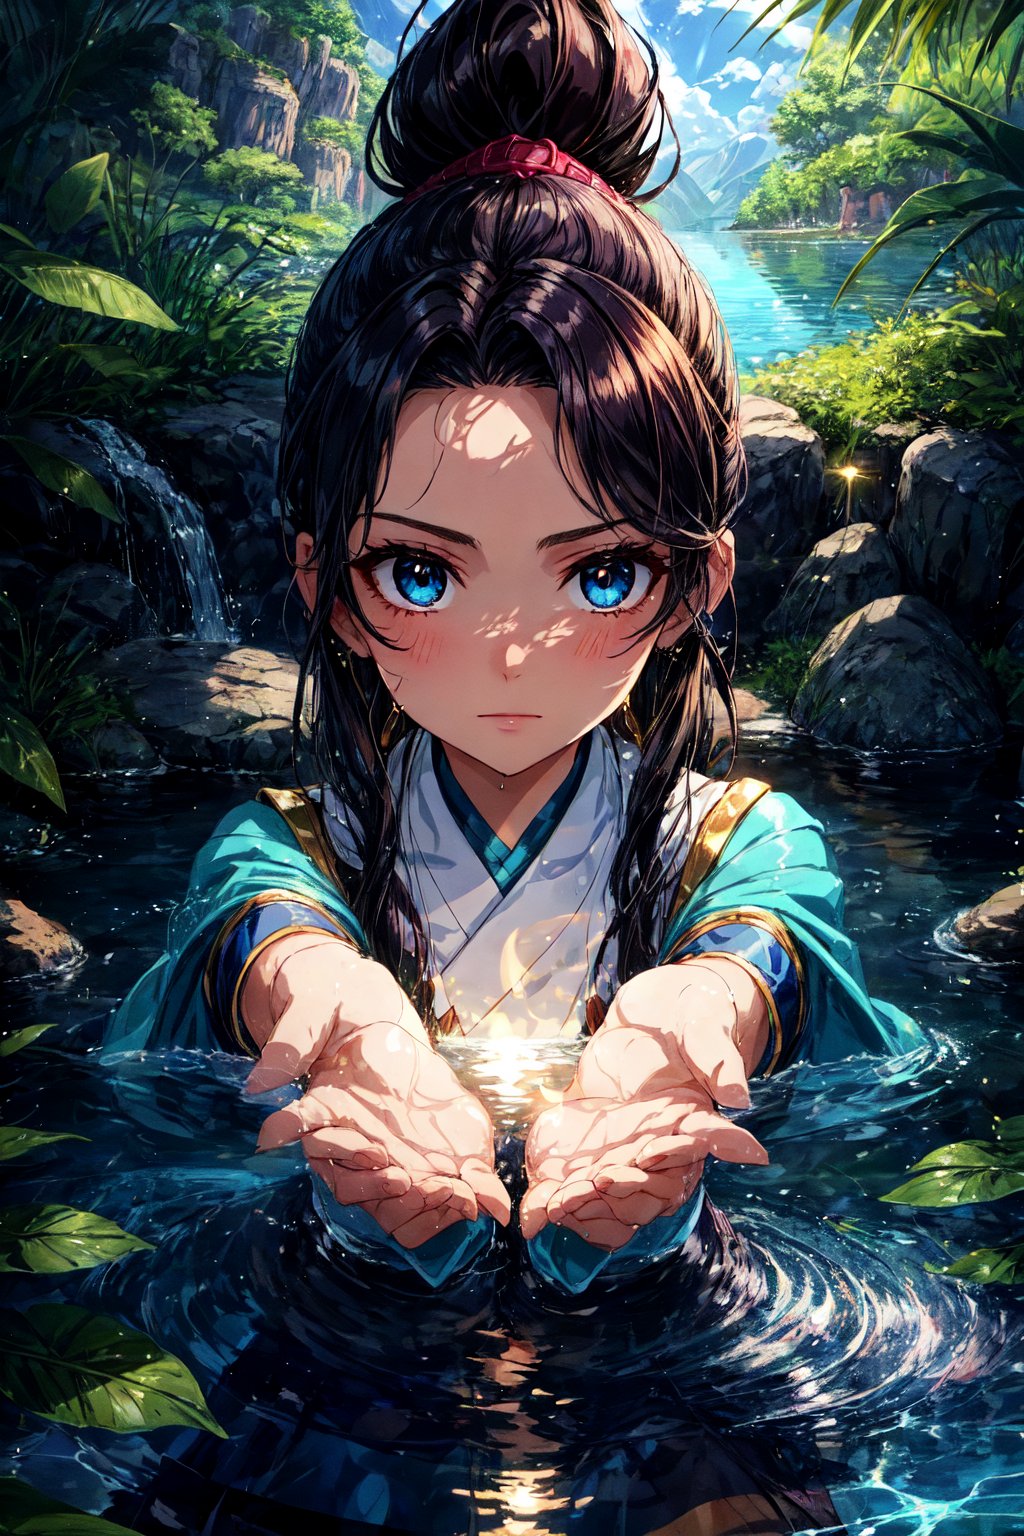 A close-up shot of Katara's determined face, her eyes locked intensely on the water before her. Her dark hair is tied back in a ponytail, and a few stray strands frame her face. Soft sunlight casts a warm glow, highlighting the gentle ripples on the surface of the water as she bends it with her powers. The composition focuses on Katara's hands, poised to manipulate the water, while the background subtly suggests the serene atmosphere of the Spirit Oasis.